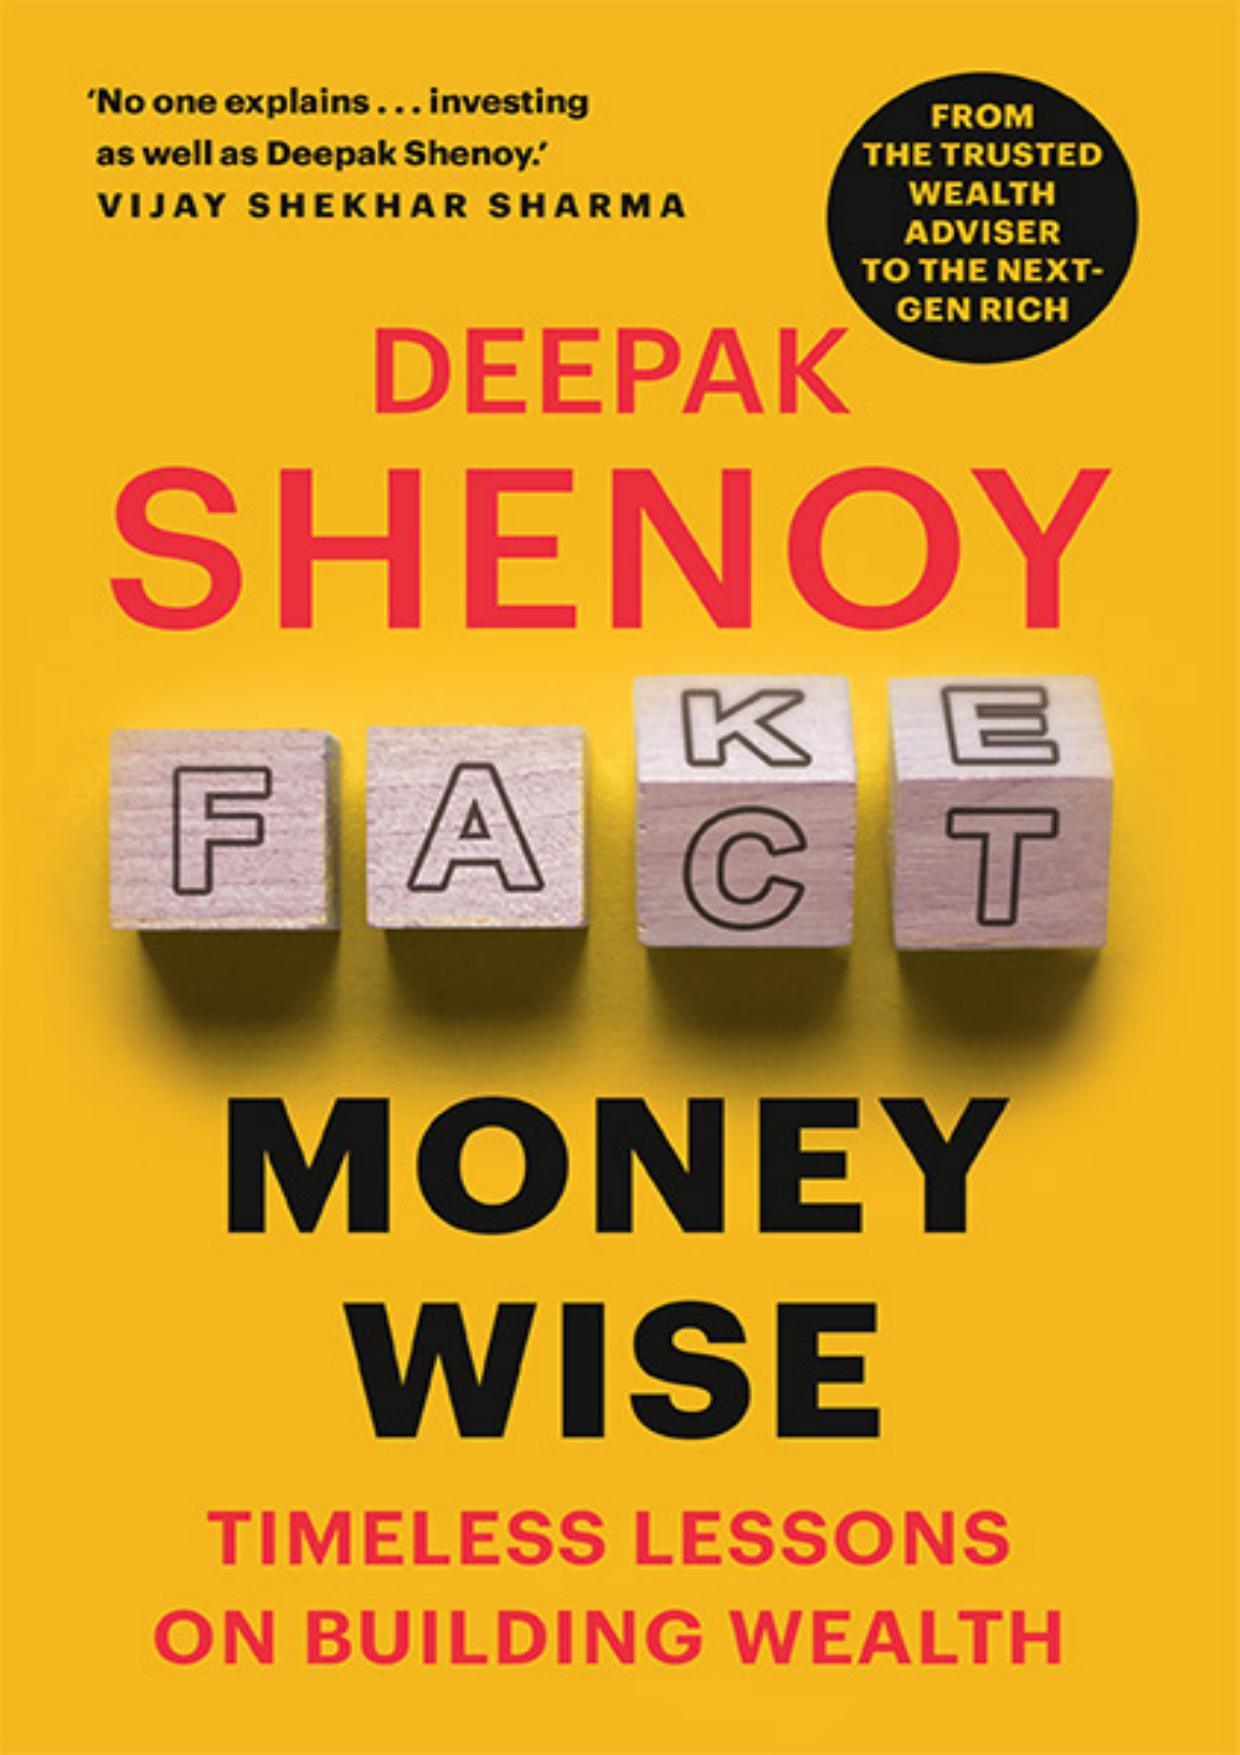 Money Wise: Timeless Lessons on Building Wealth by Deepak Shenoy